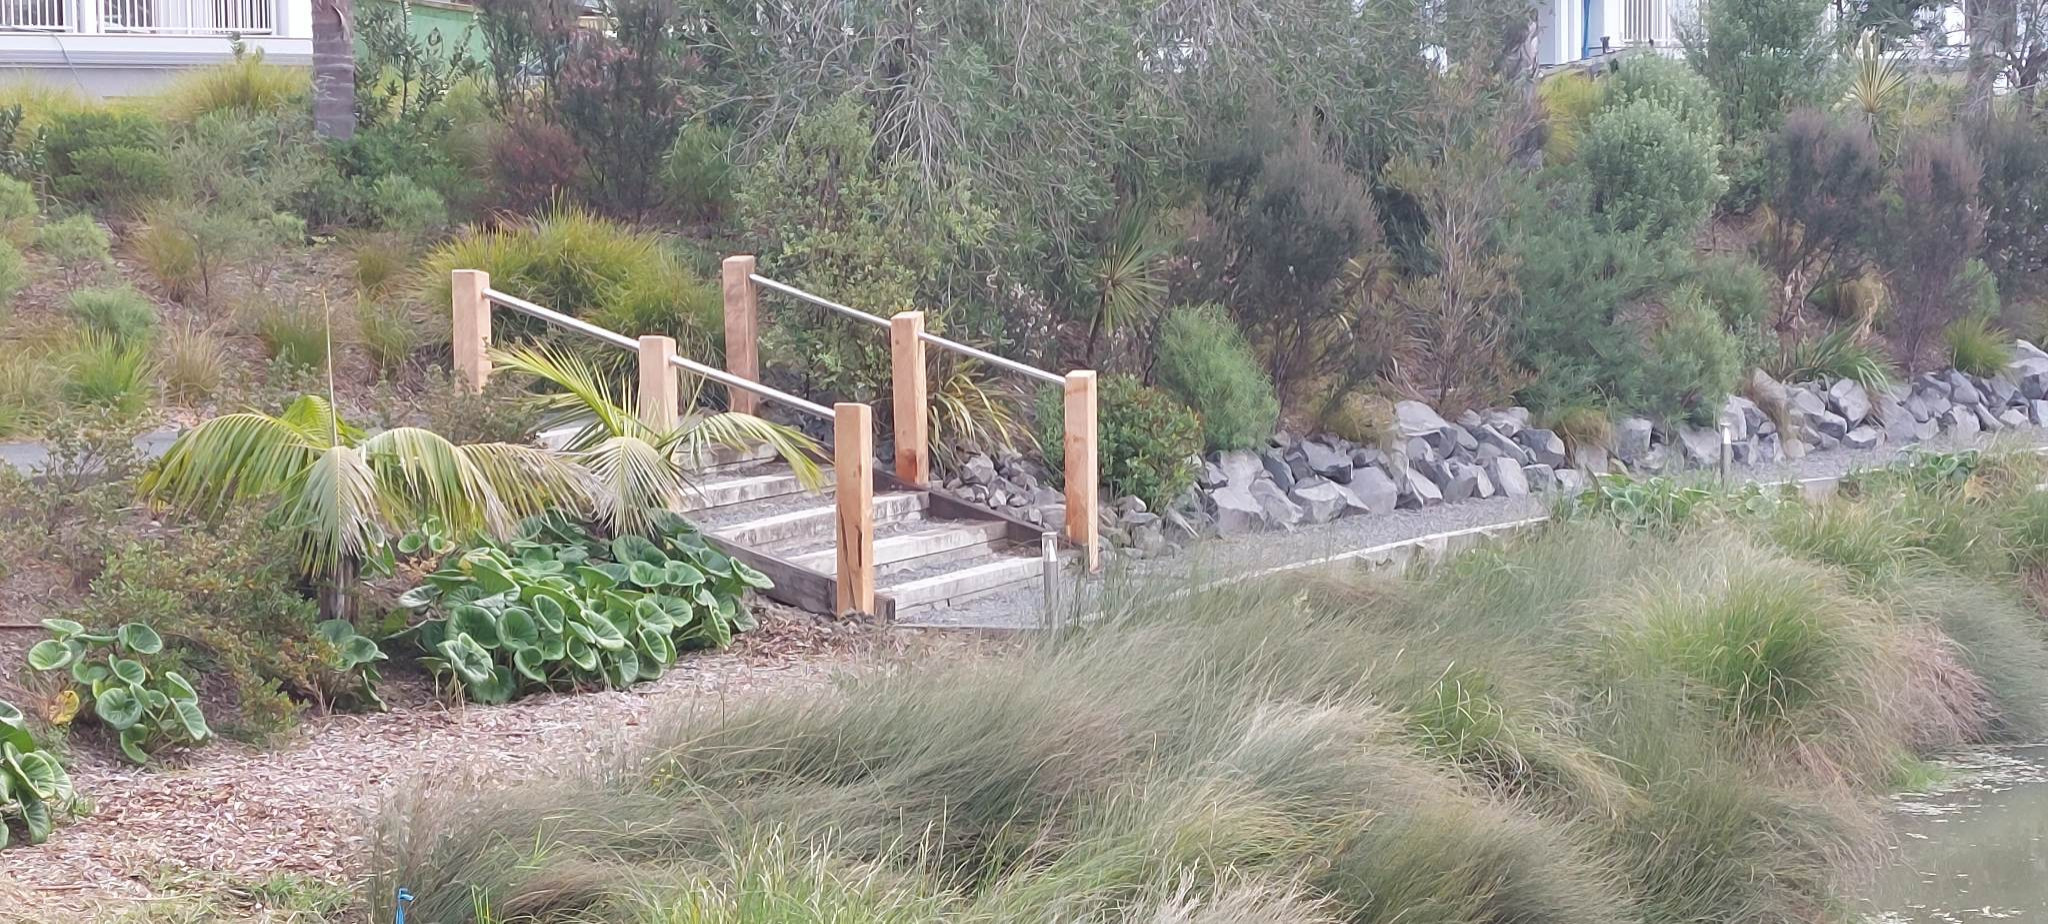 Handrails and stairs that lead to the newly reinstated garden path.